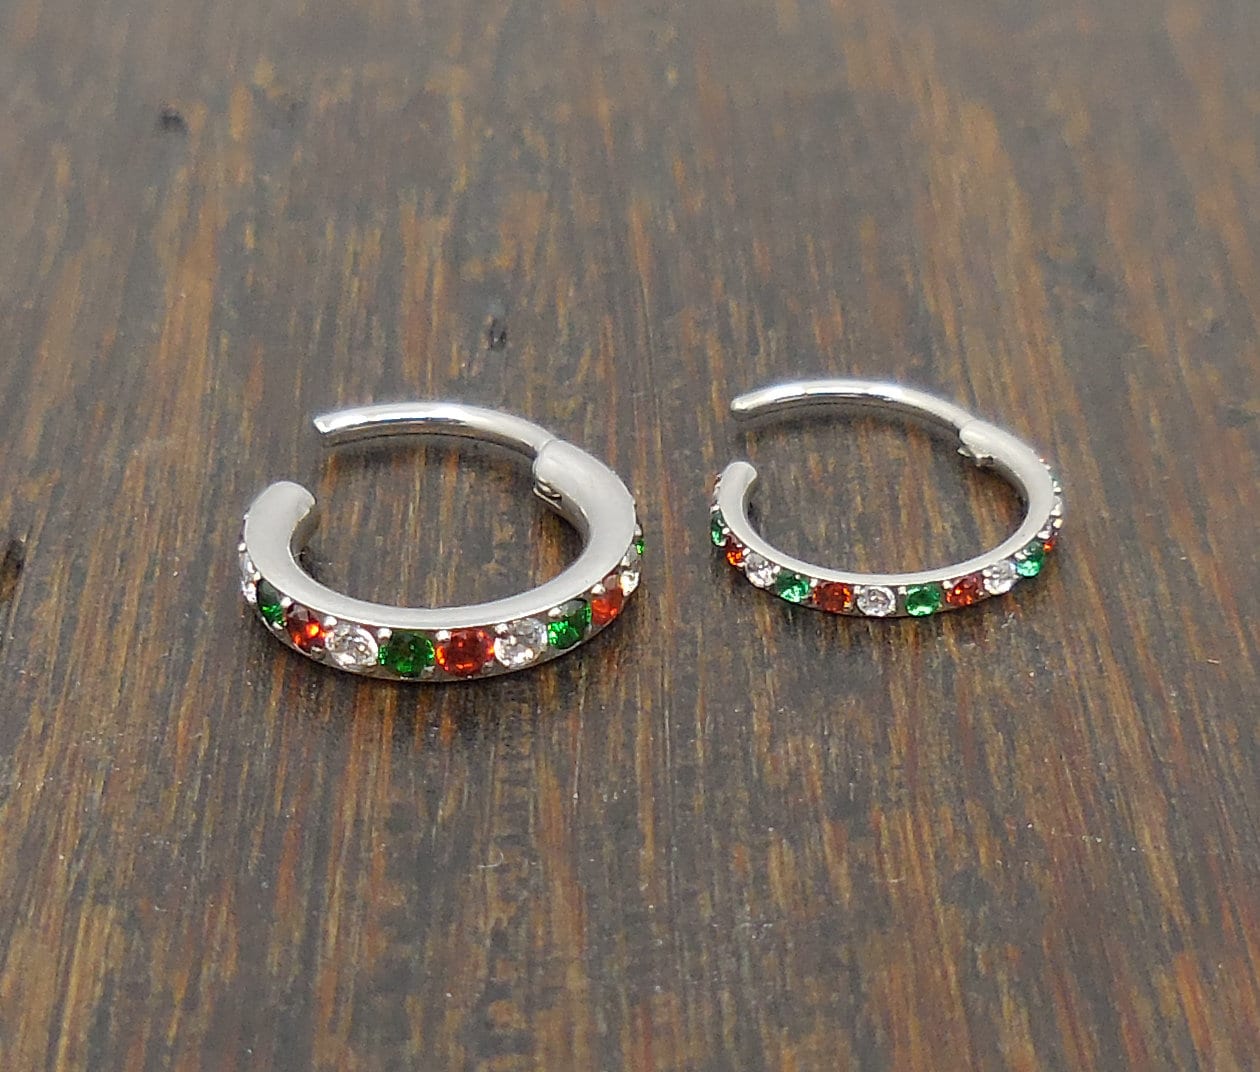 8mm 18G/20G Surgical Steel Hinged Clicker Nose Stud/Hinged Segment CZ Crystal Hoop Ring/Cartilage Helix/Nose Septum Ring /Christmas Colors